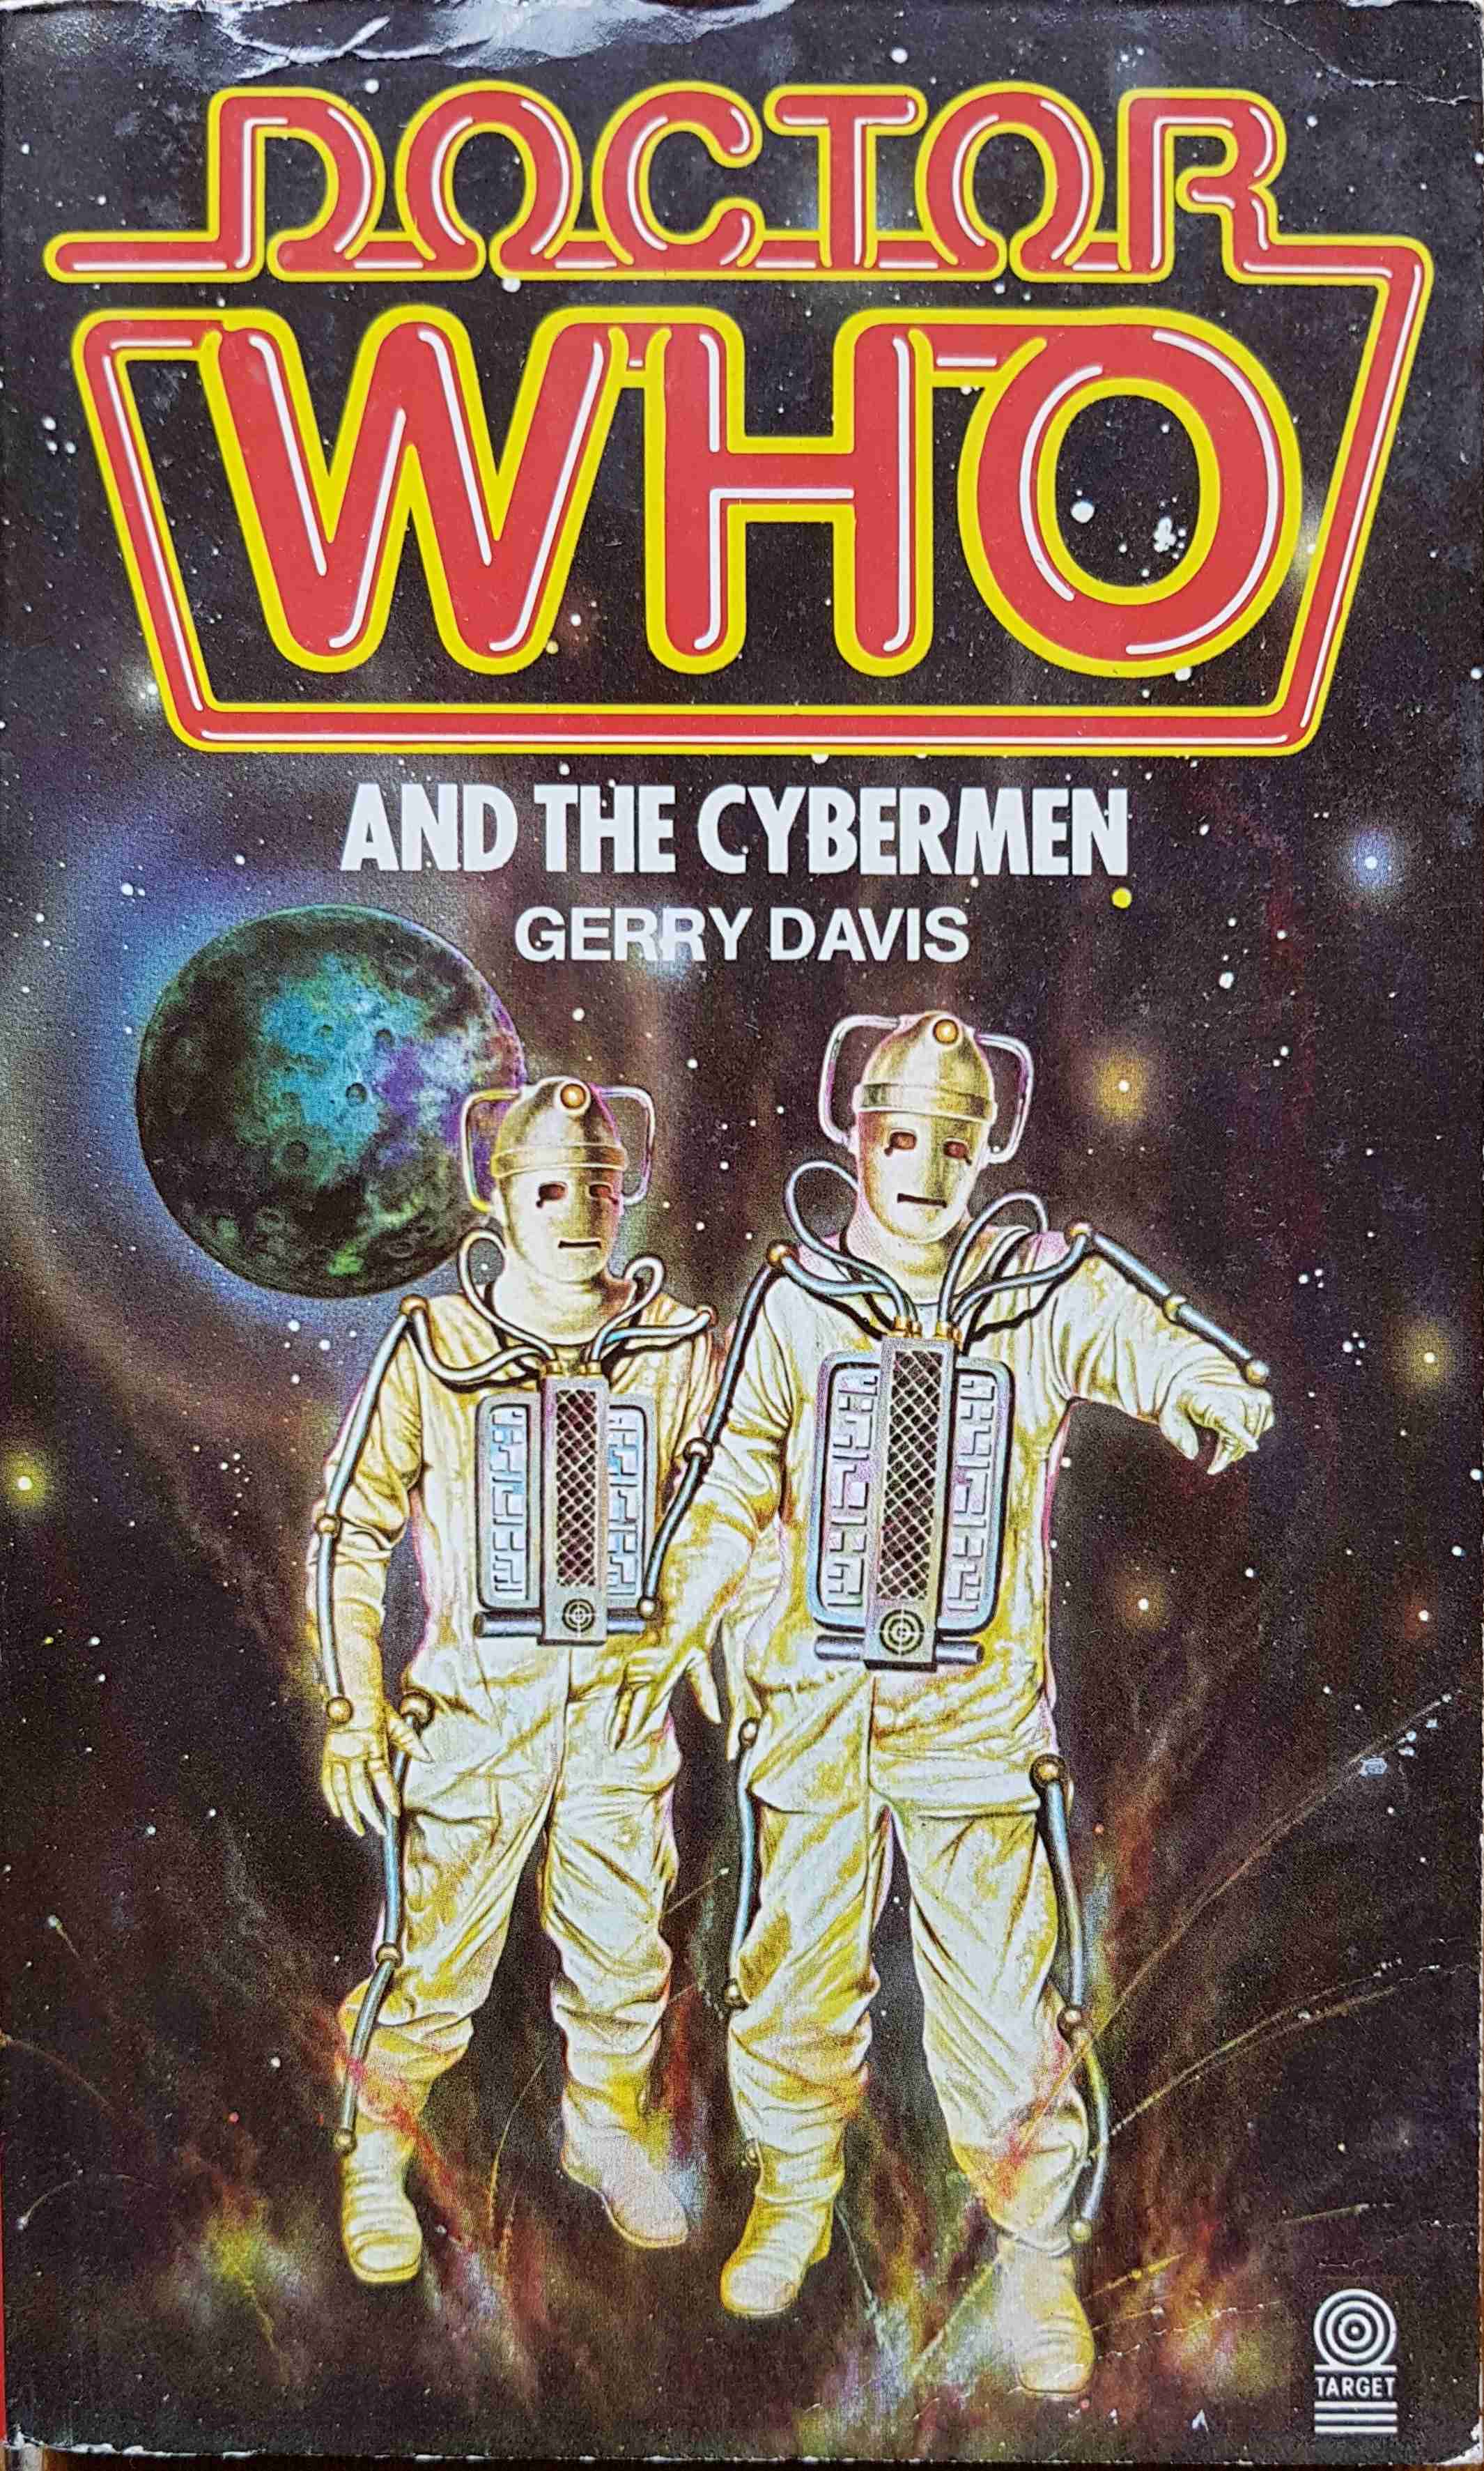 Picture of Doctor Who - The Cybermen by artist Gerry Davis from the BBC books - Records and Tapes library